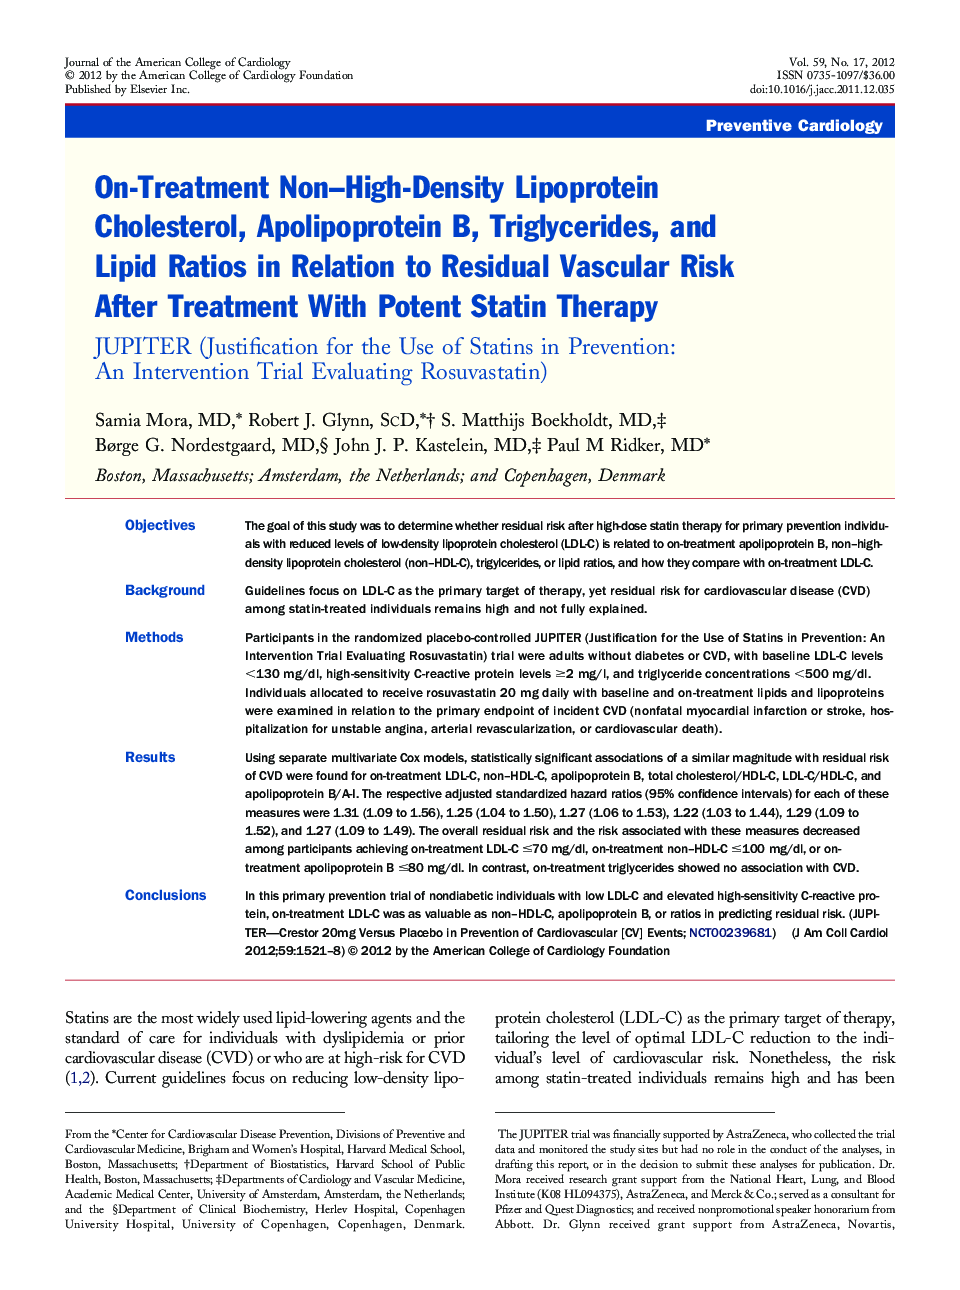 On-Treatment Non–High-Density Lipoprotein Cholesterol, Apolipoprotein B, Triglycerides, and Lipid Ratios in Relation to Residual Vascular Risk After Treatment With Potent Statin Therapy : JUPITER (Justification for the Use of Statins in Prevention: An Int